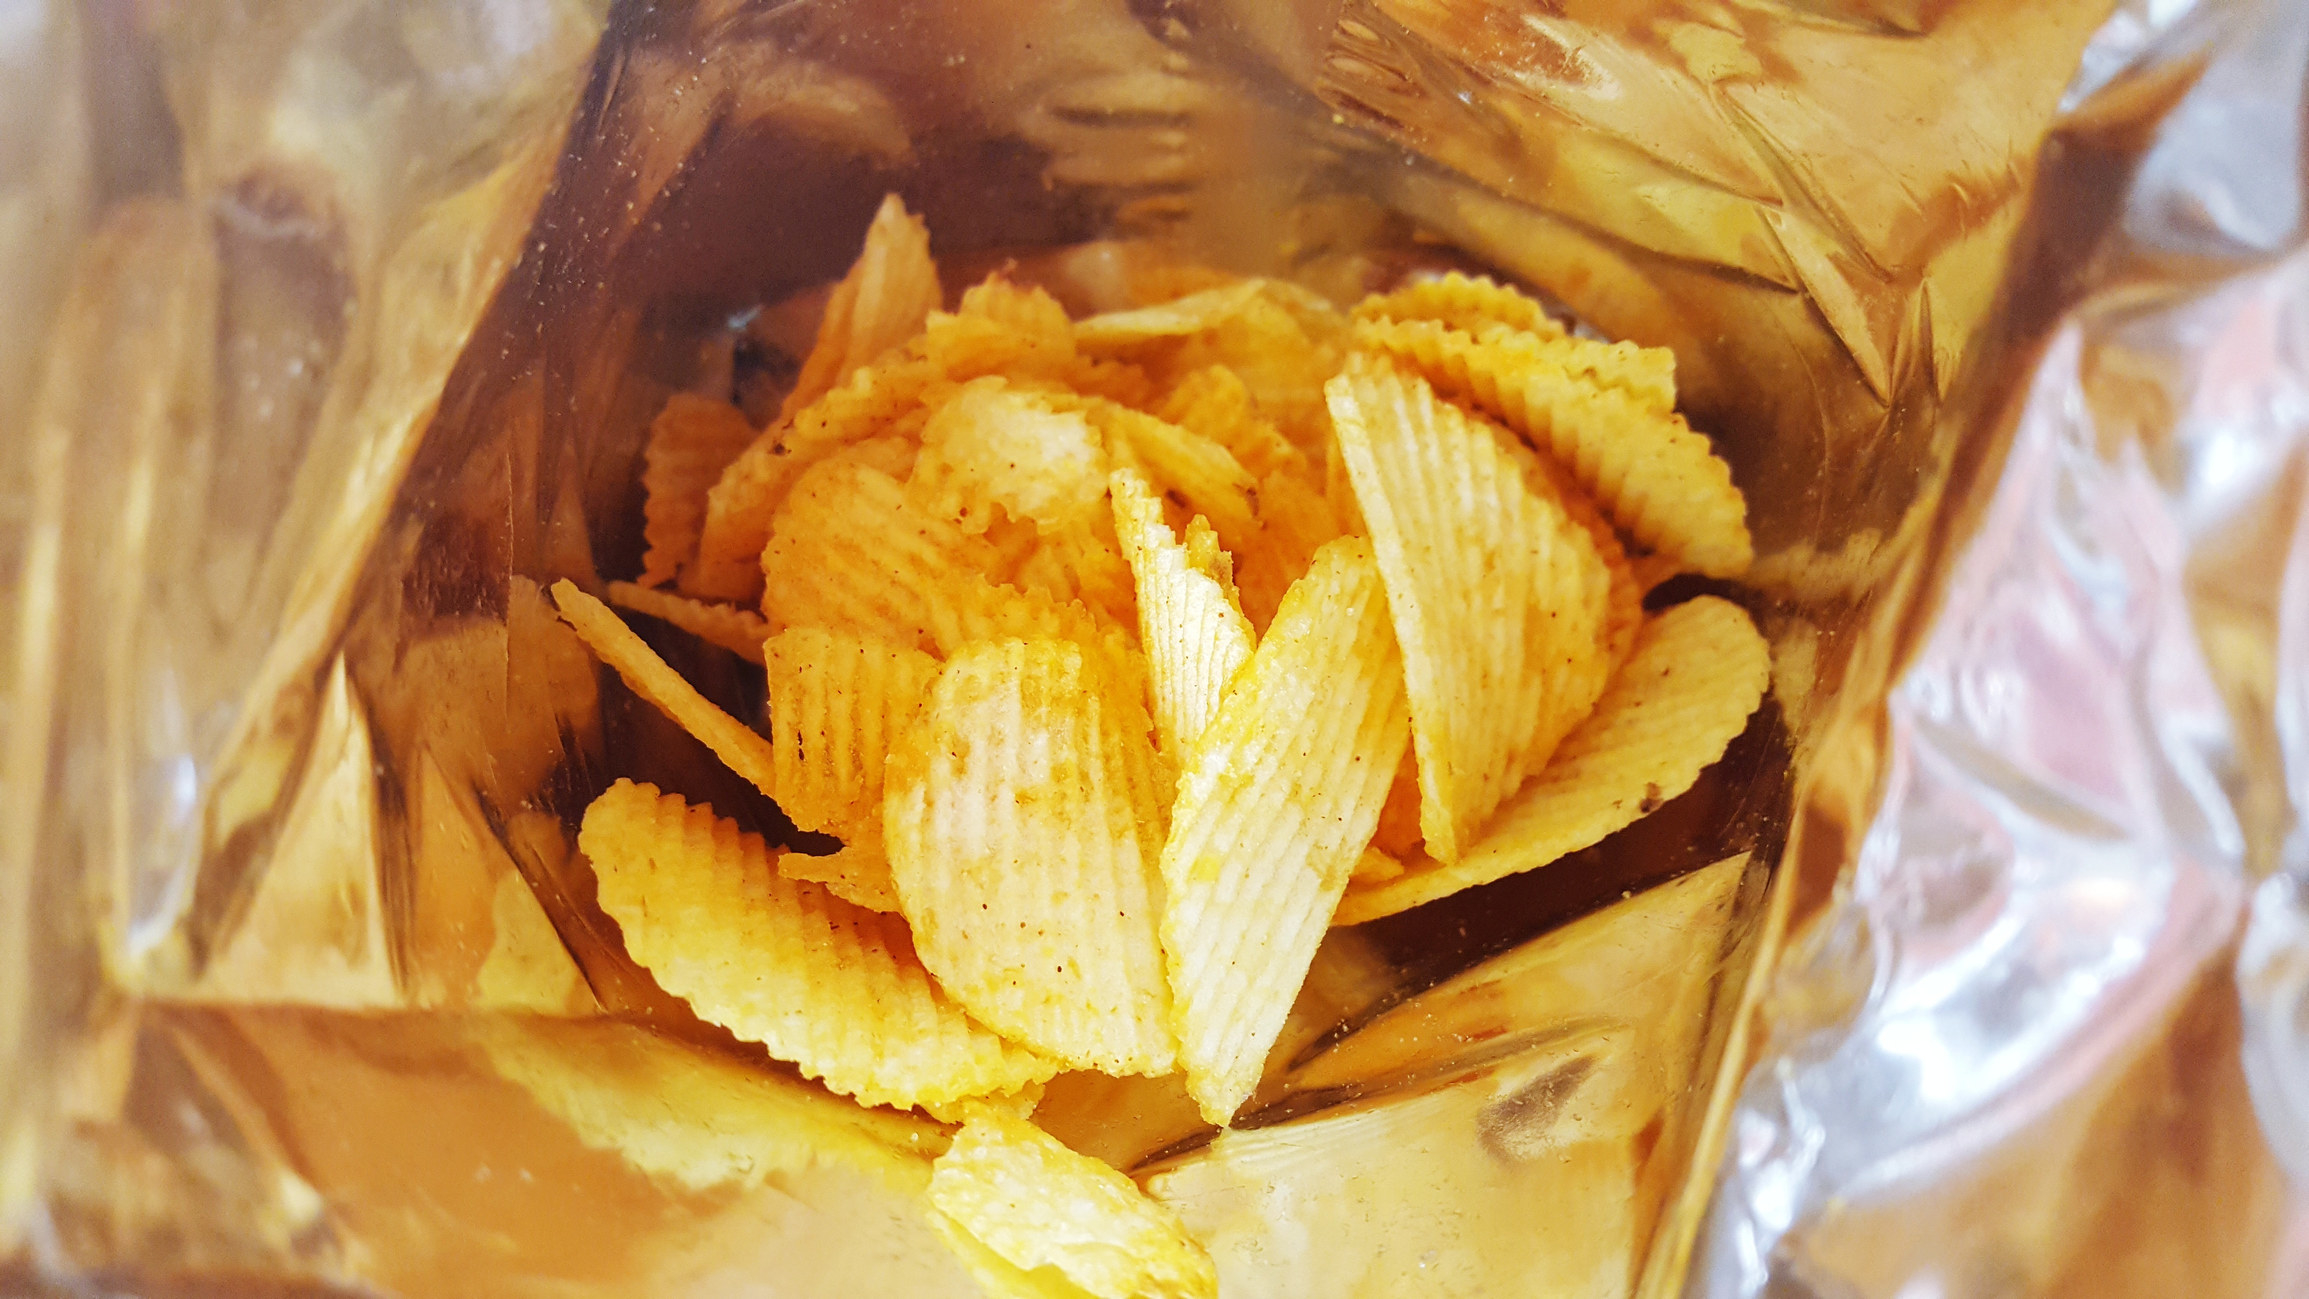 Mostly empty bag of potato chips